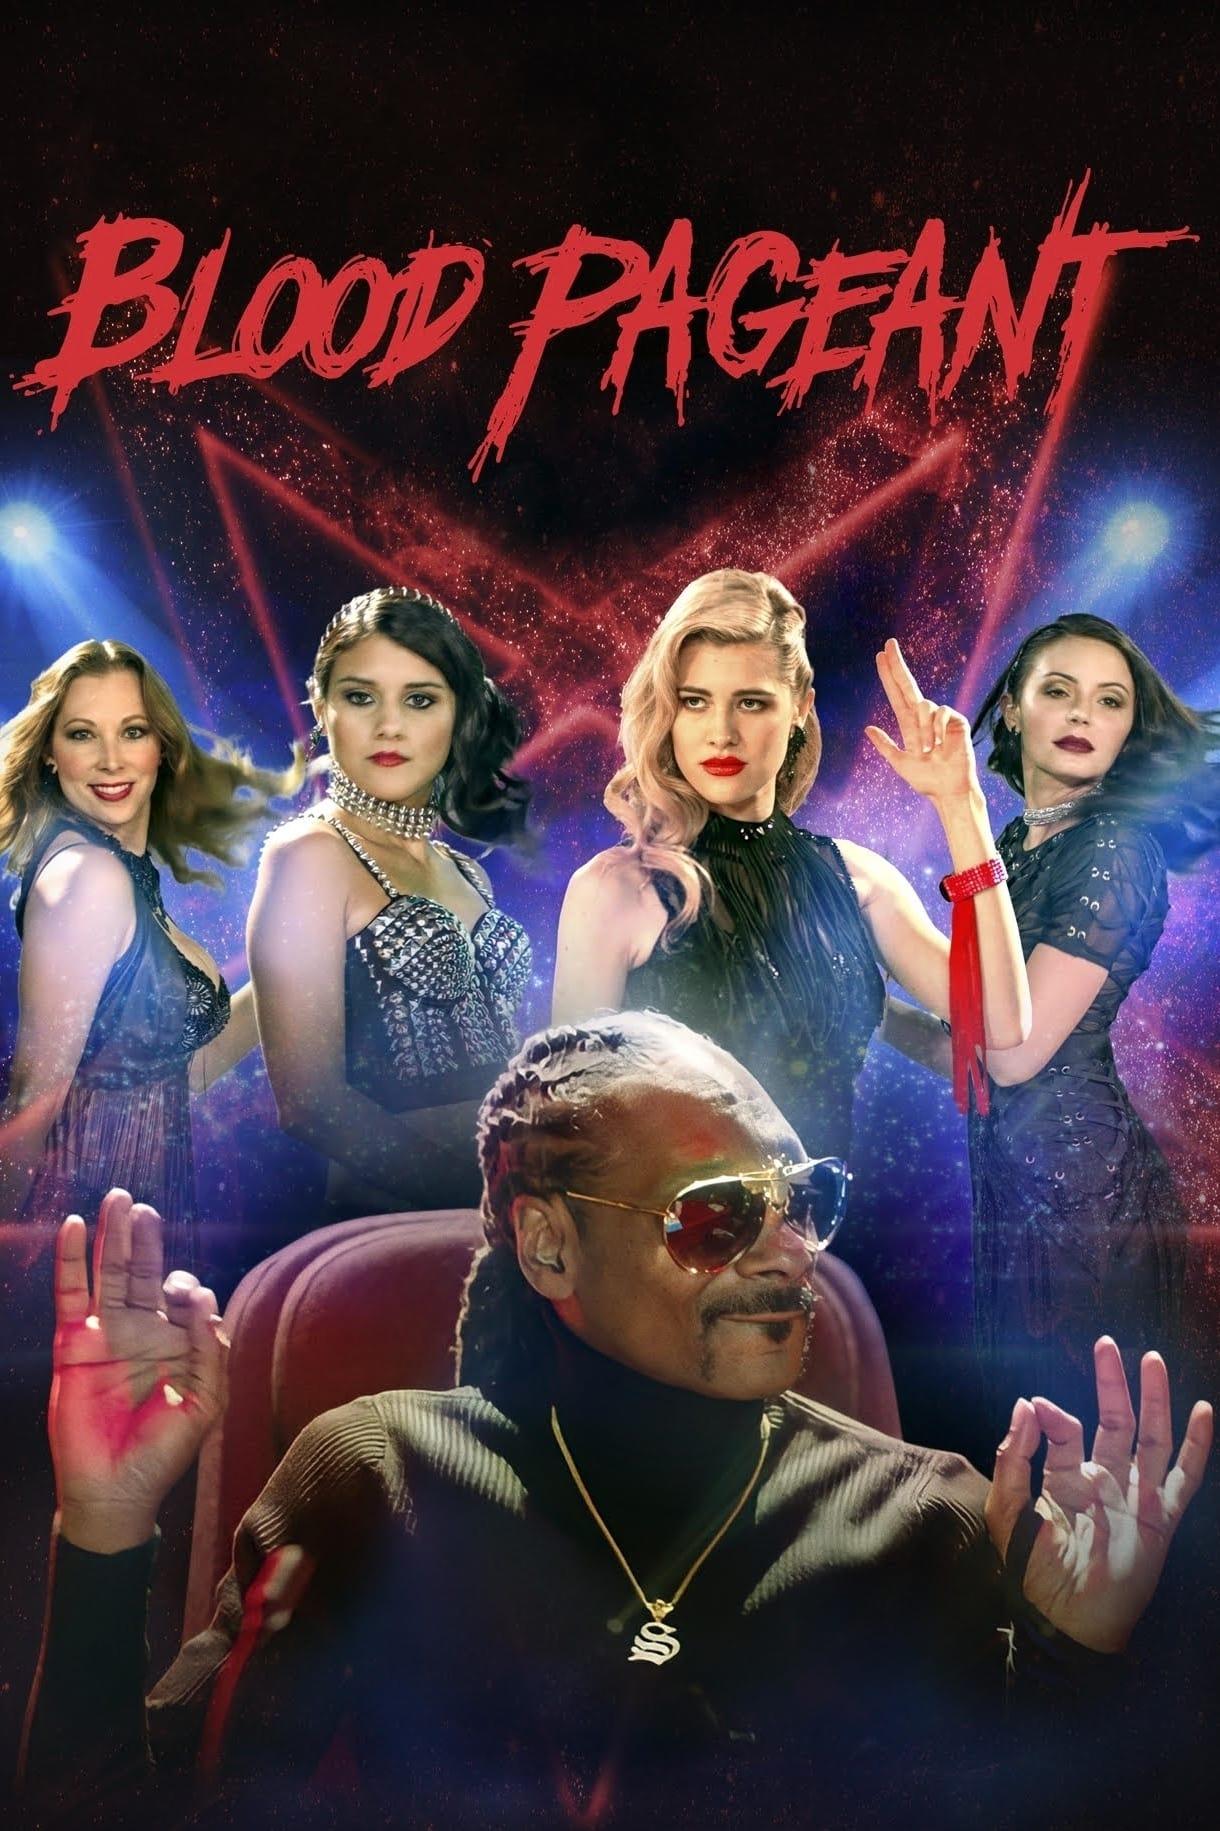 Blood Pageant poster